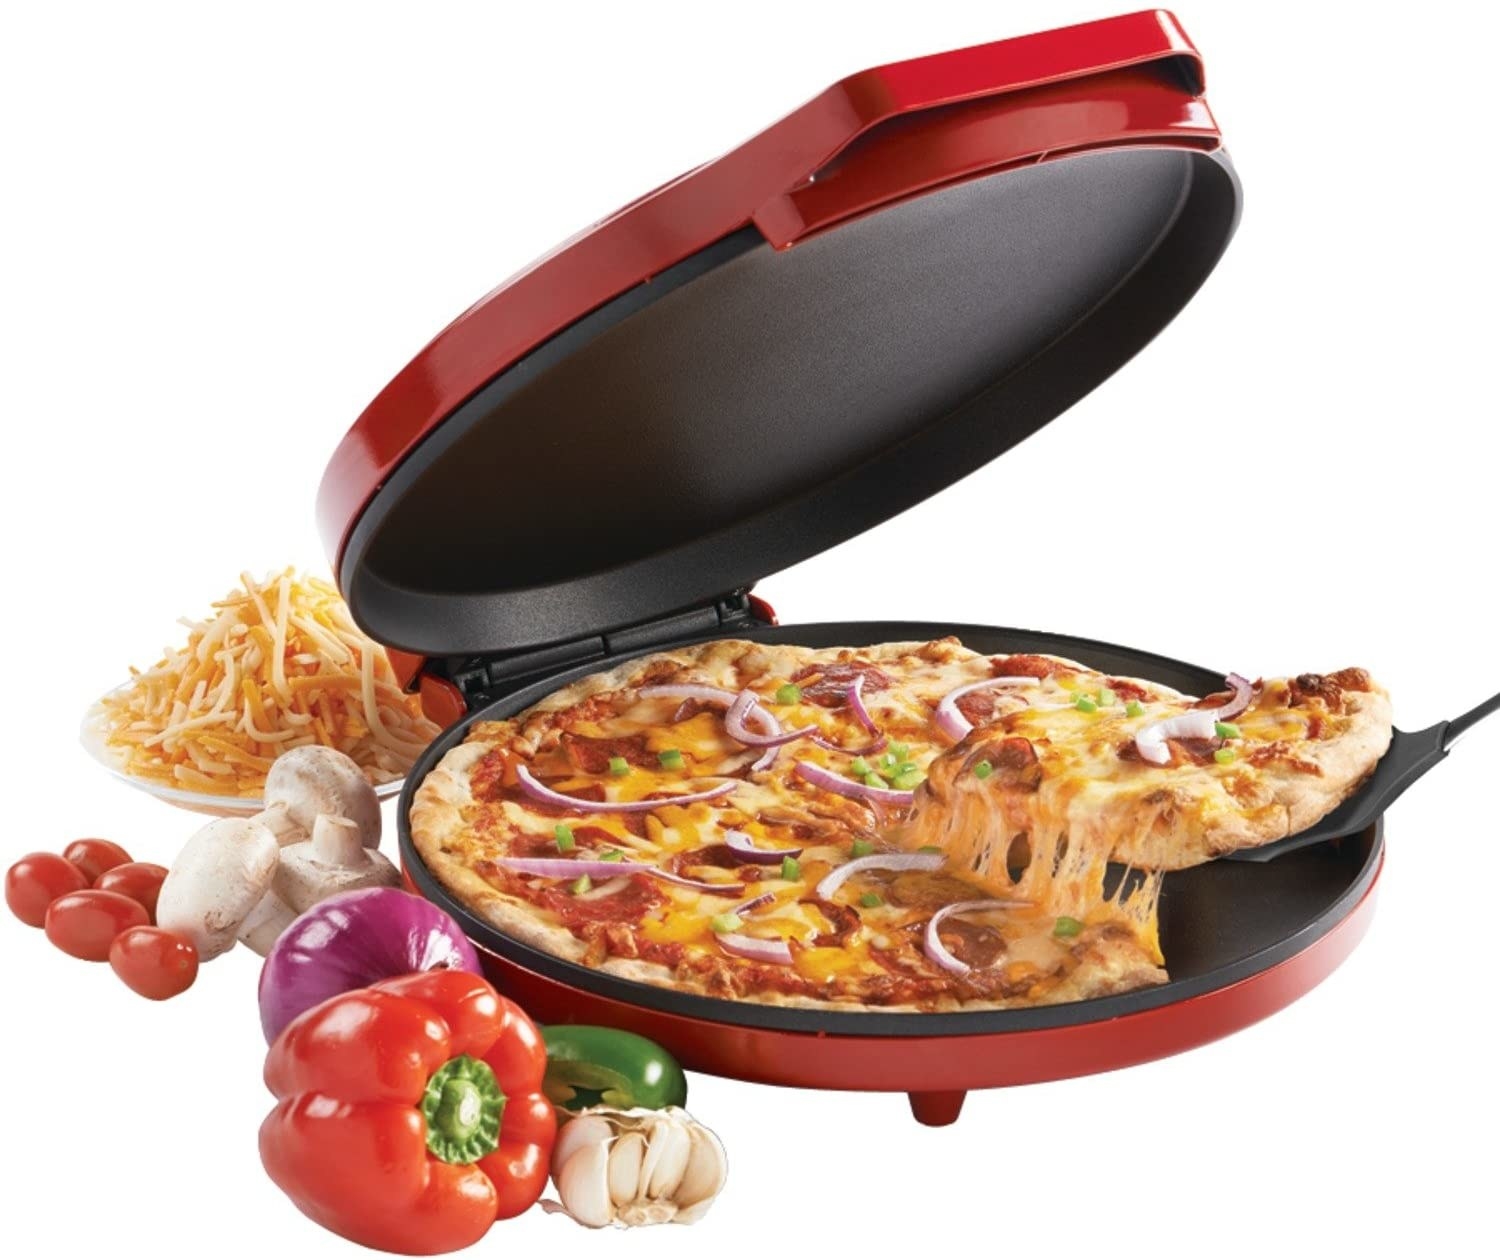 Red Pizza Maker With Pizza Inside